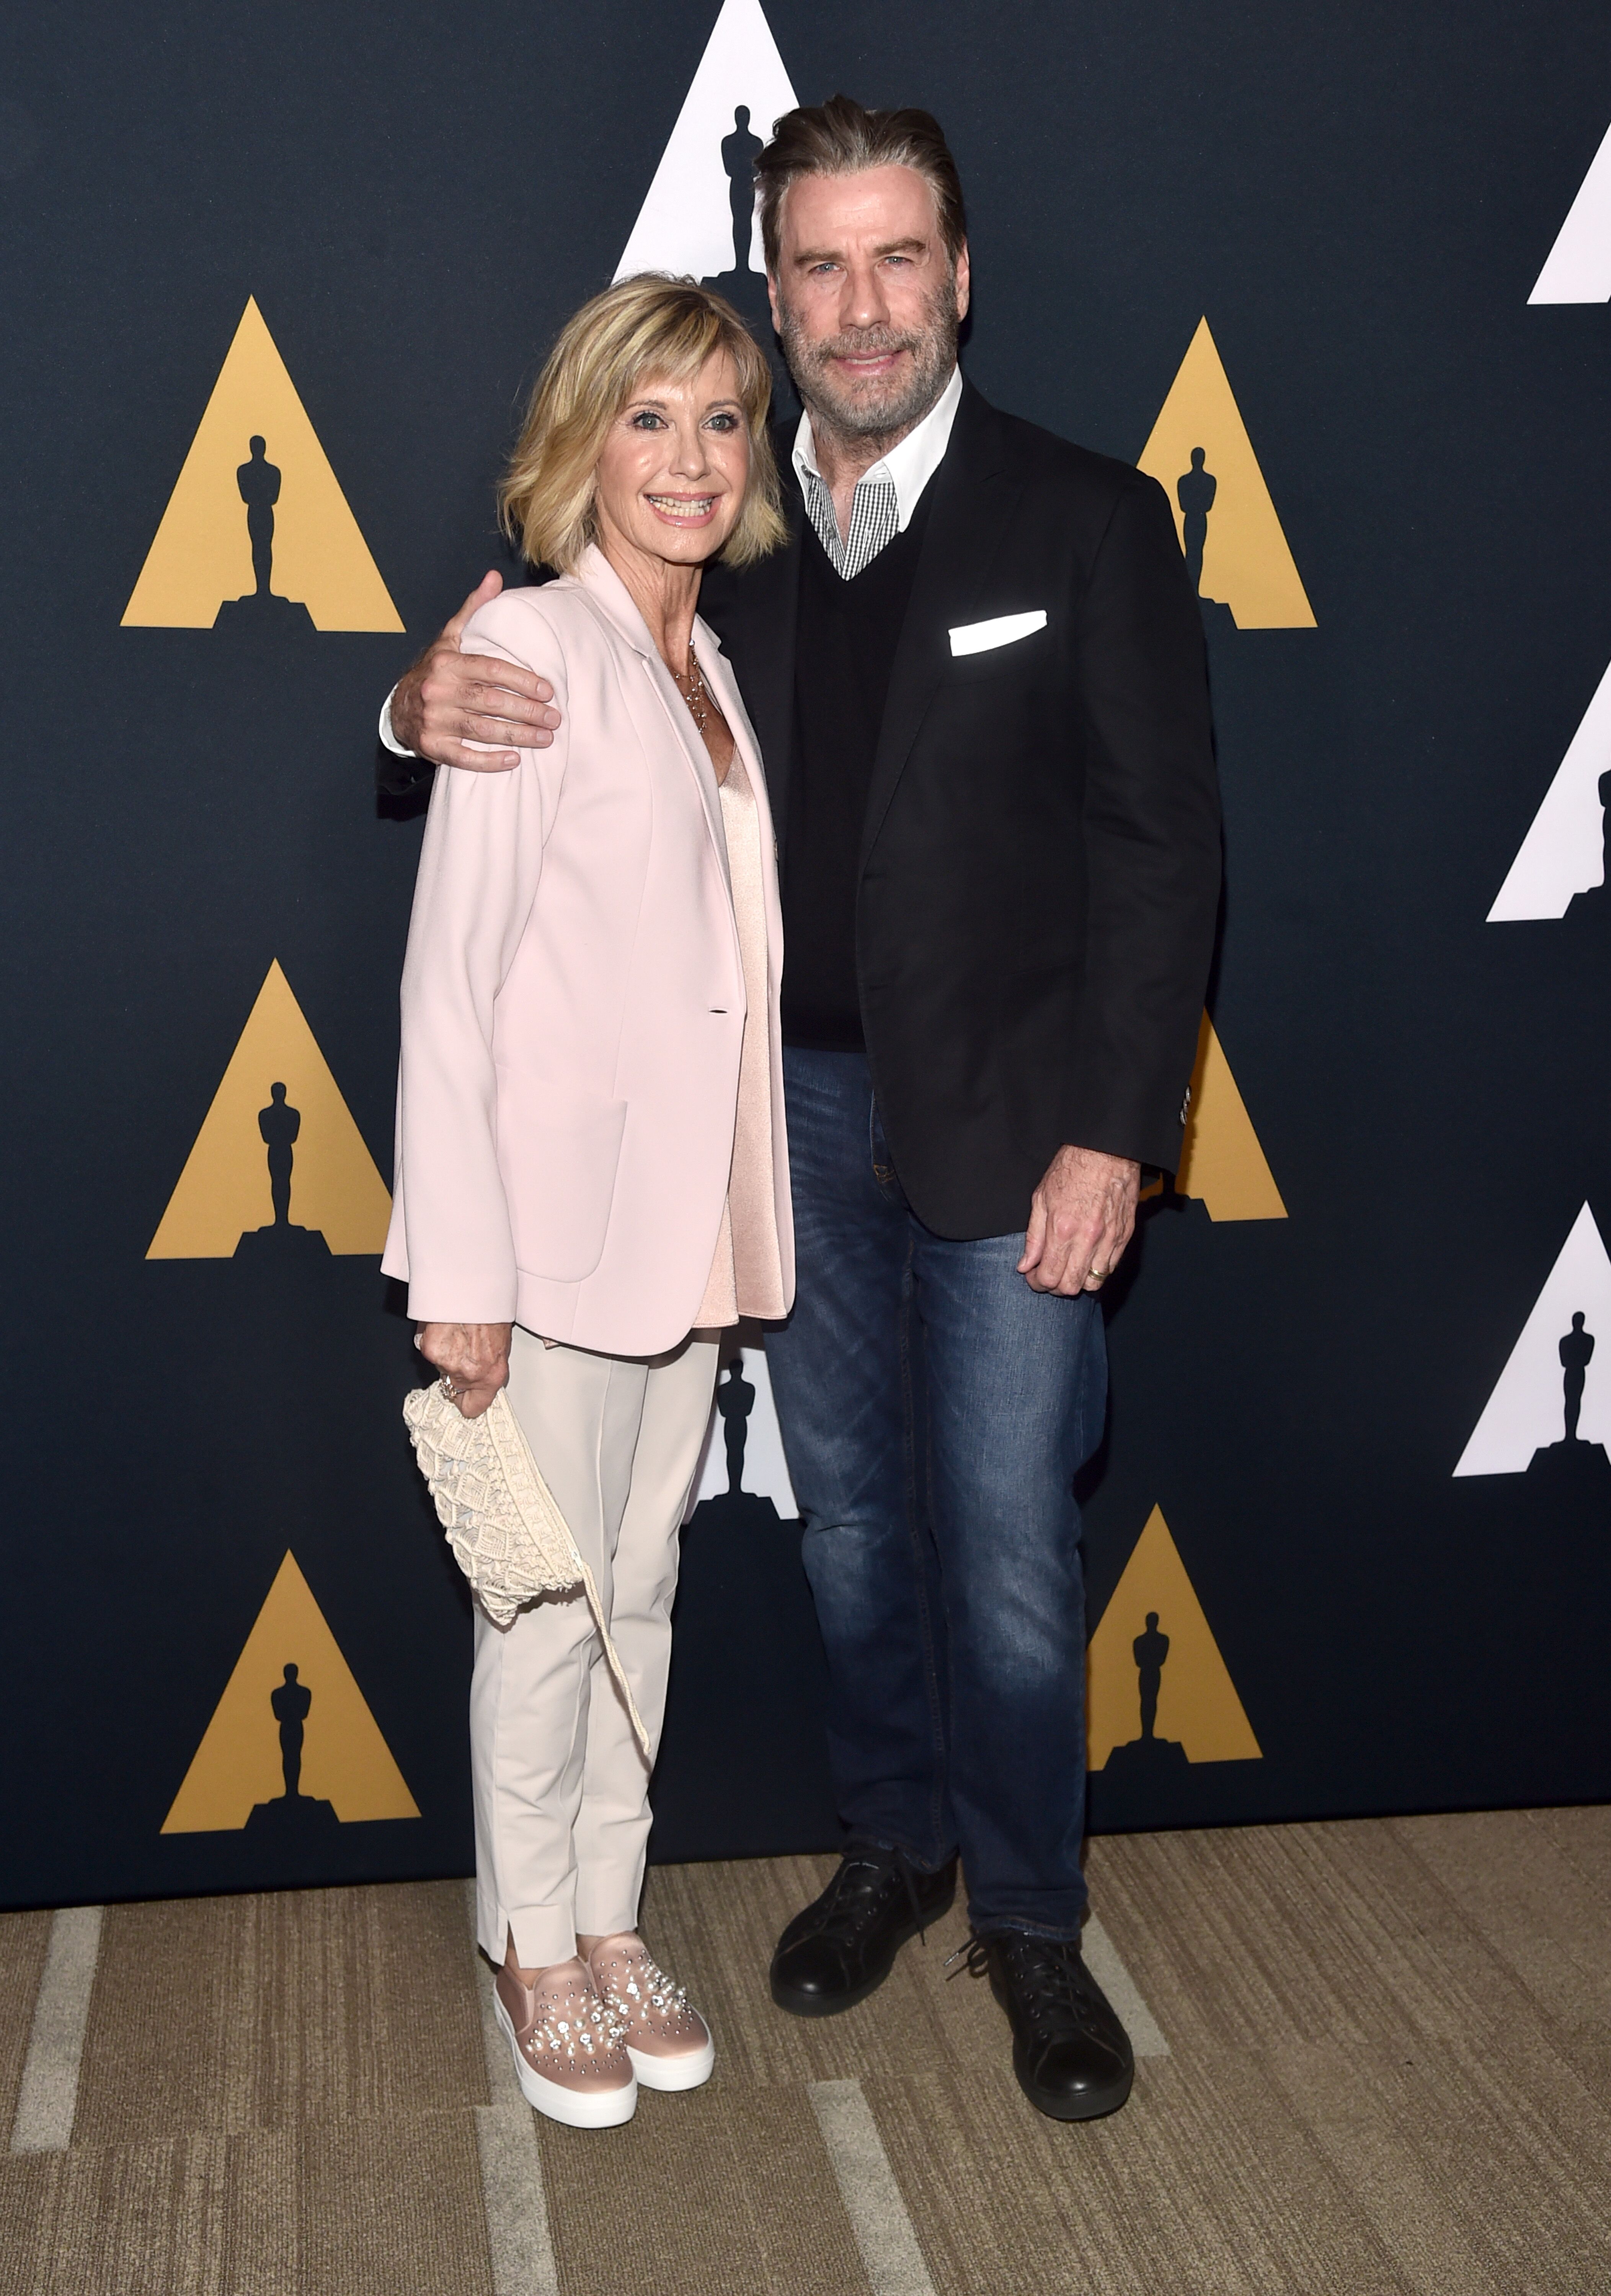 Olivia Newton-John and John Travolta at the "Grease" 40th-anniversary screening on August 15, 2018. | Photo: Getty Images